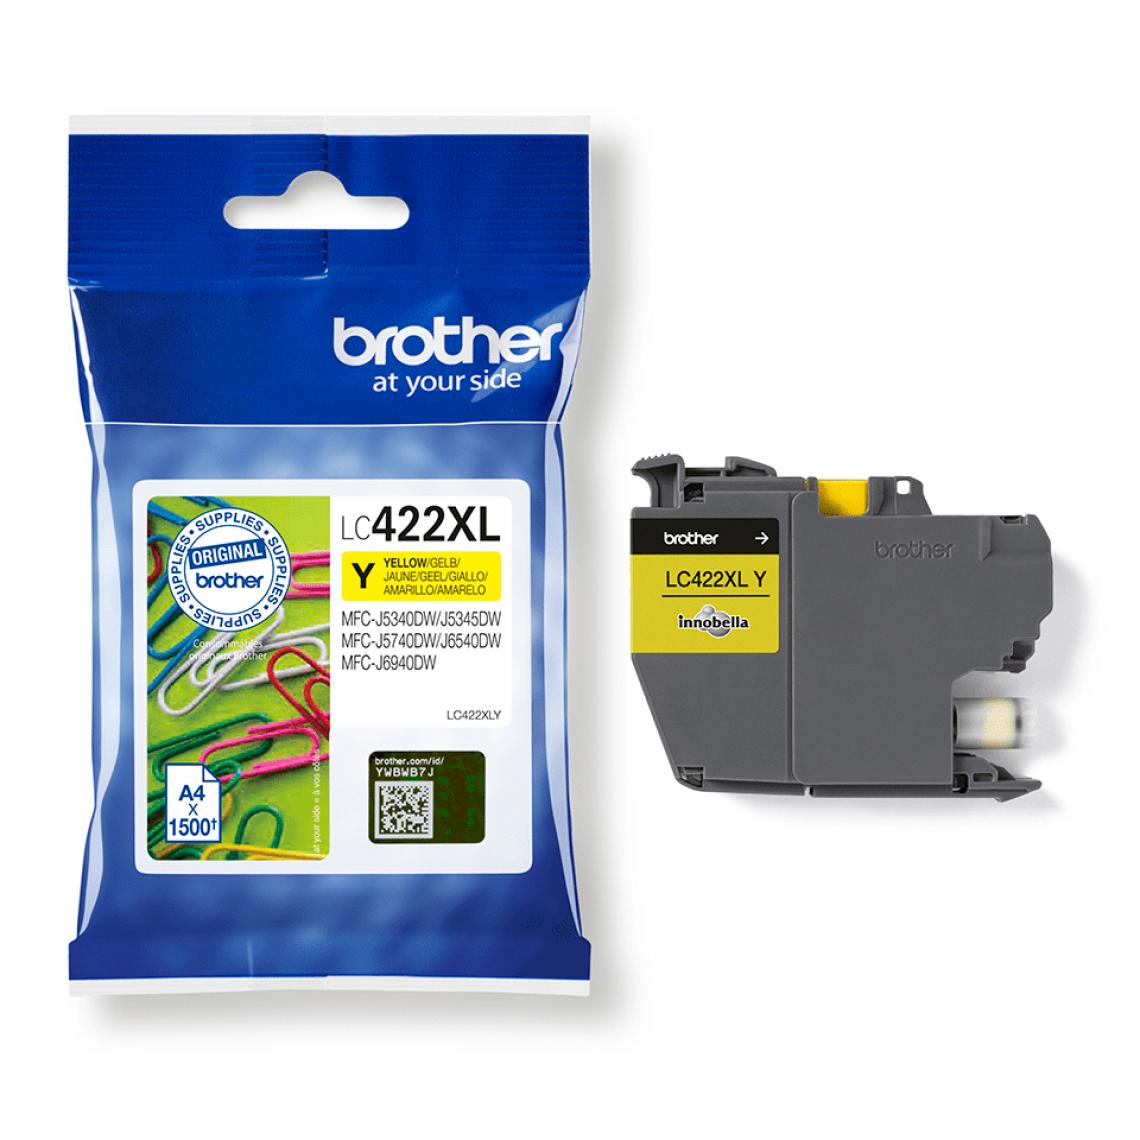 Brother - LC422XLY HY Ink For BH19M/B LC422XLY HY Ink Cartridge For BH19M/B Compatible with MFC-J5340DW MFC-J5740DW MFC-J6540DW MFC-J6940DW 1500 pages - Cartouche d'encre